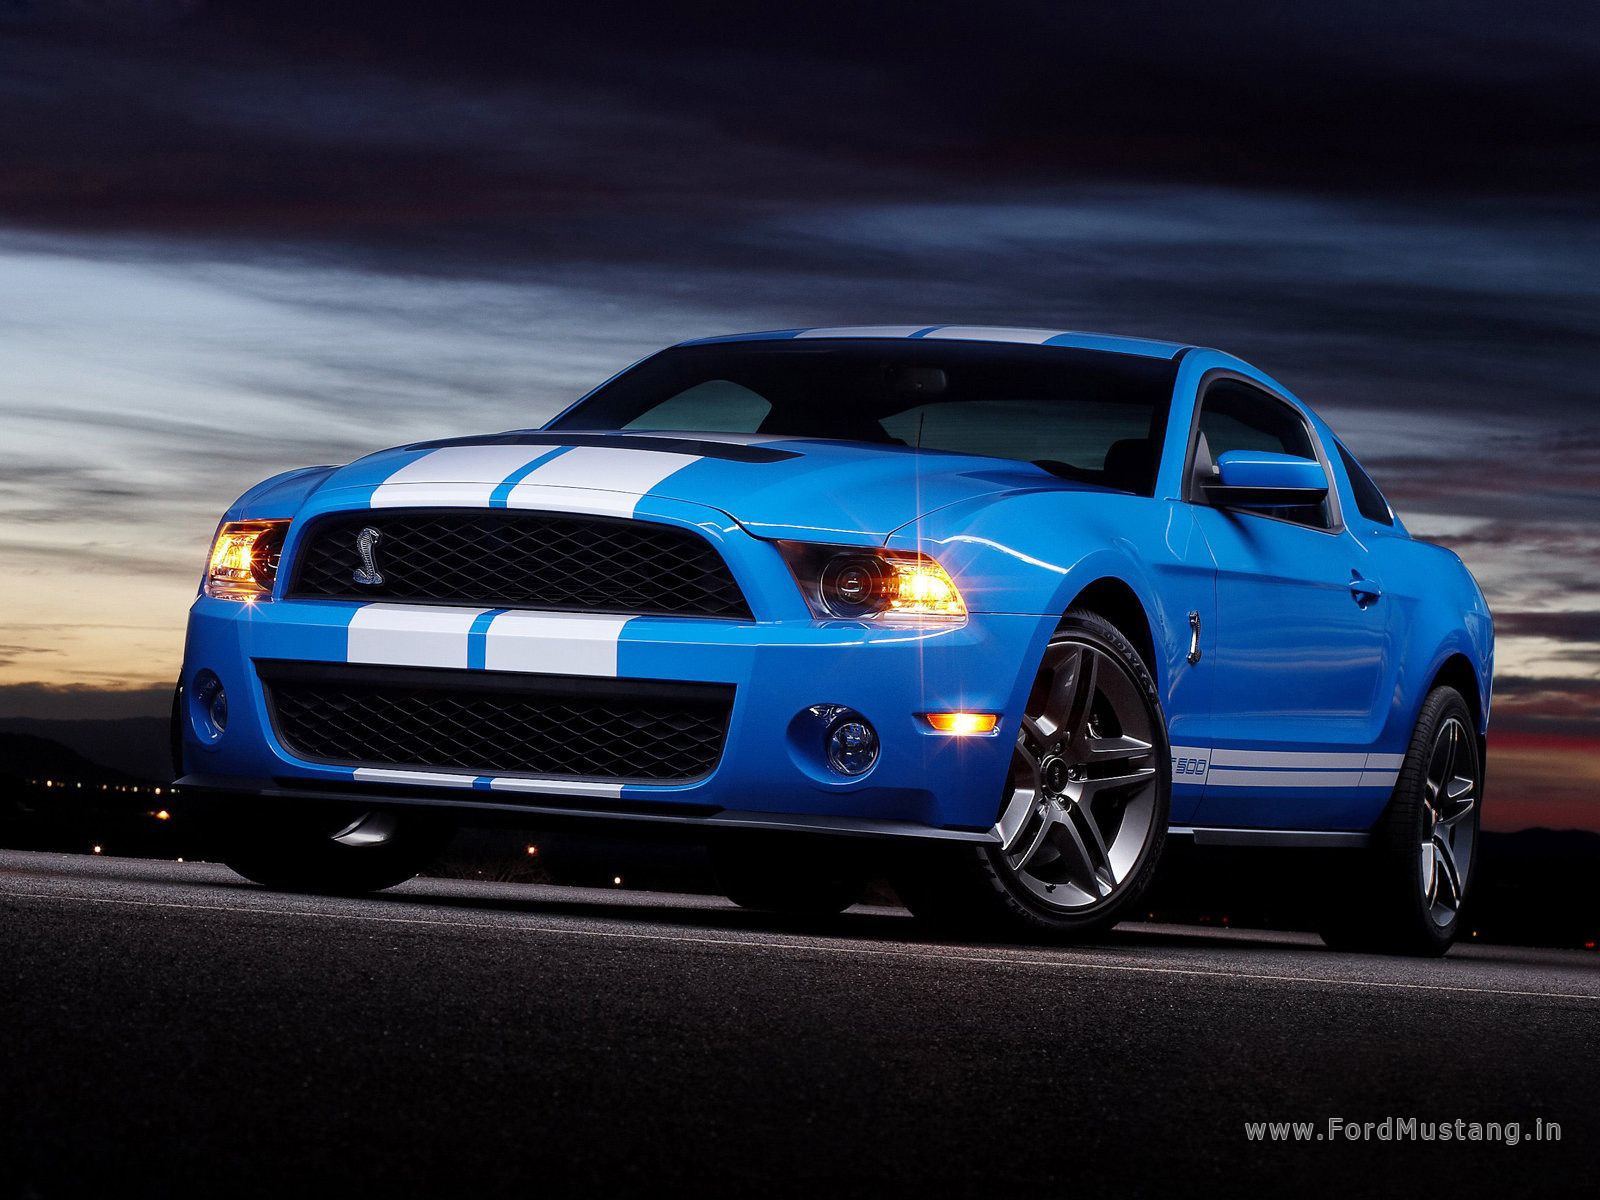 2010 Ford mustang shelby gt500 review #4